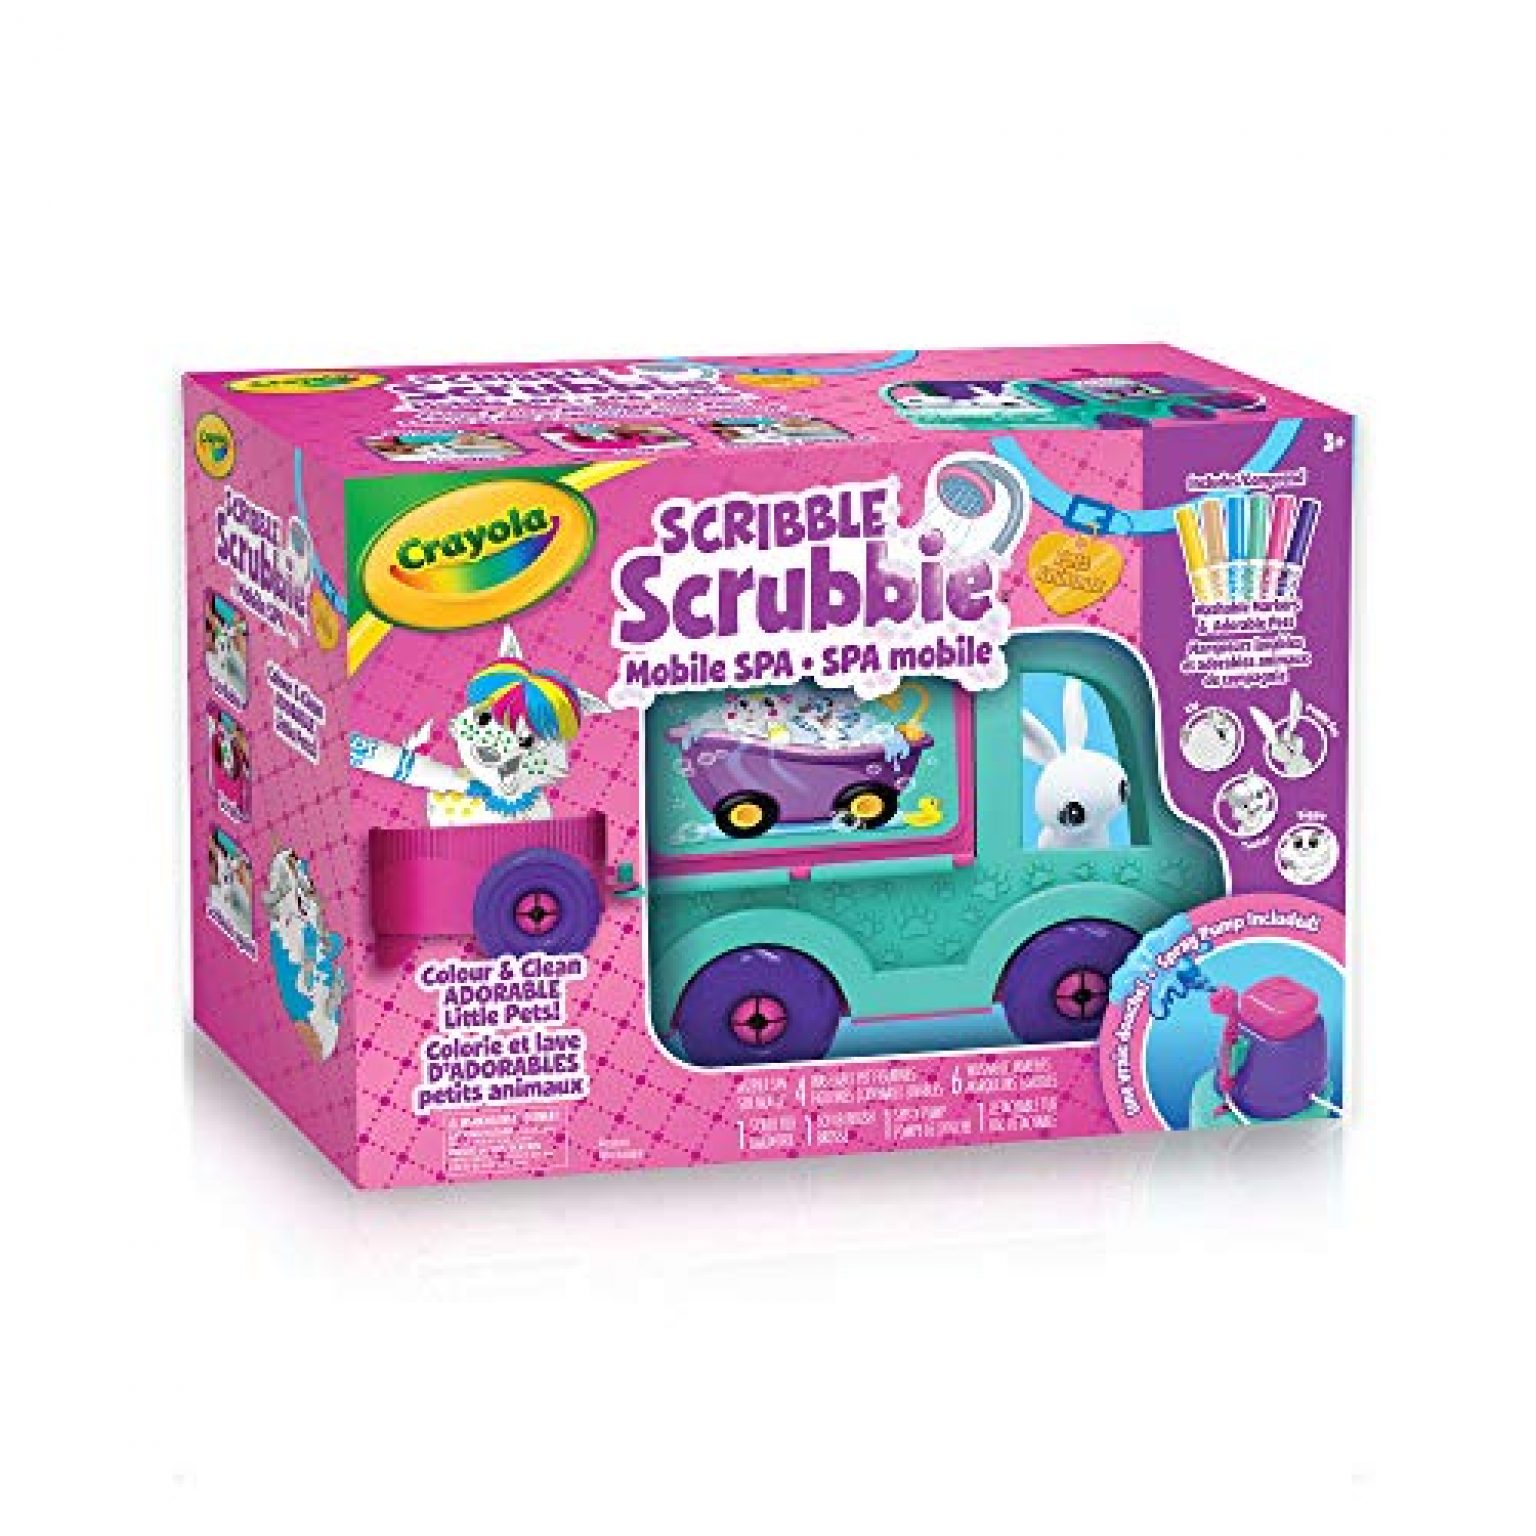 crayola-scribble-scrubbie-pets-mobile-spa-playset-toy-kit